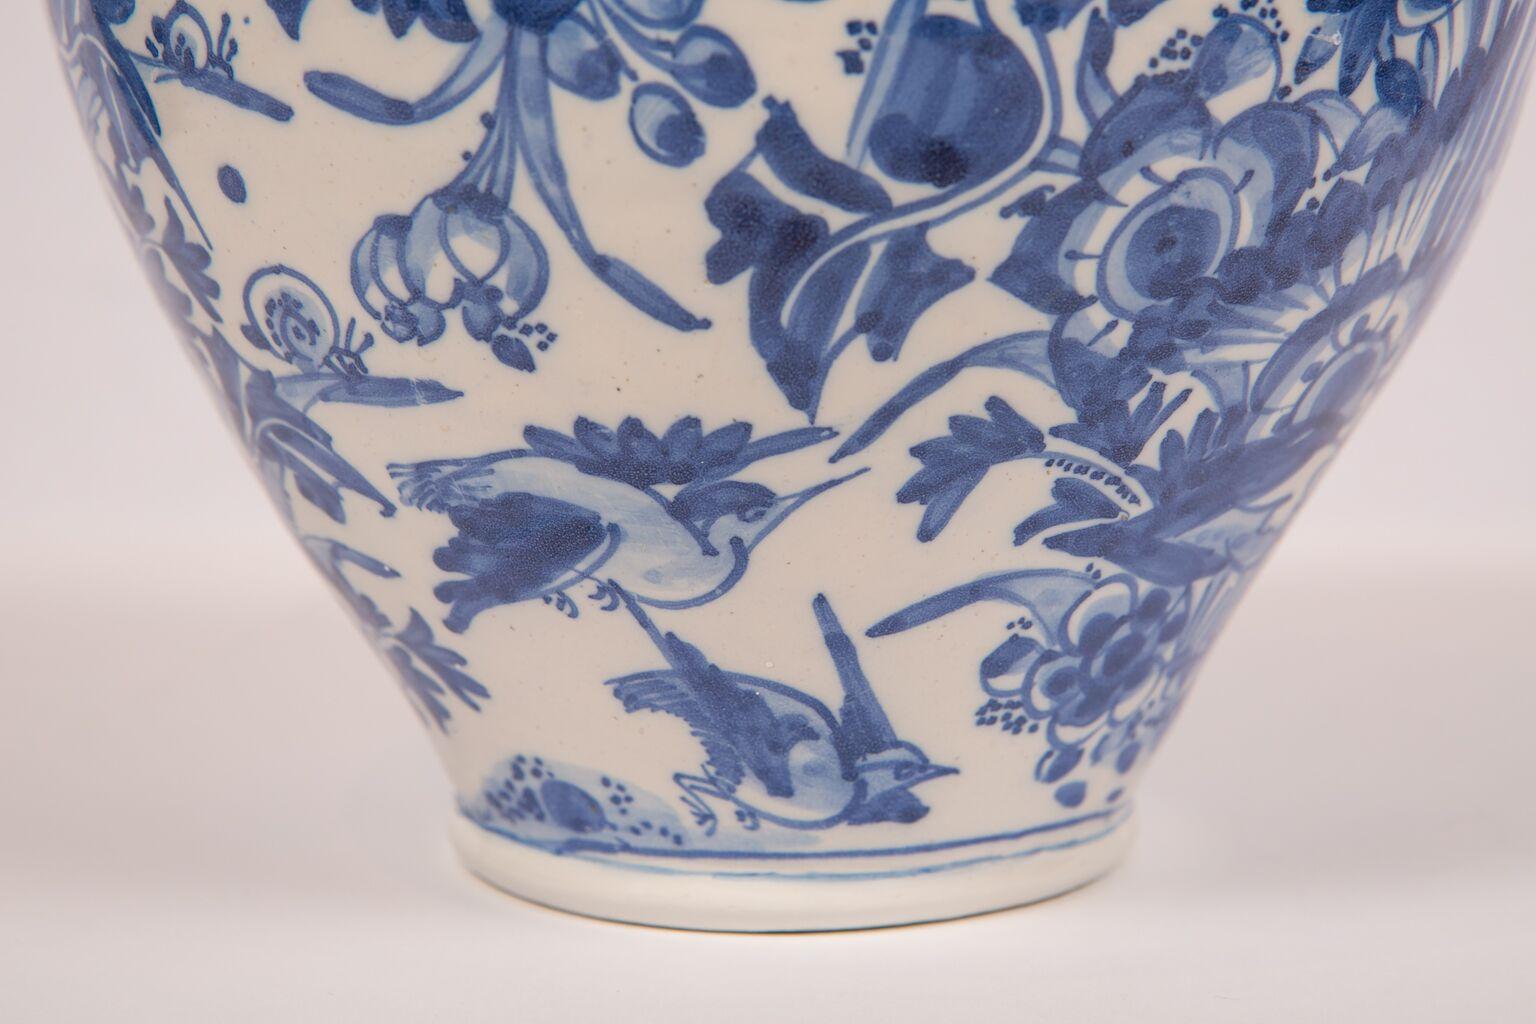 WHY WE LOVE IT:  It's 17th century-pastel blue, and well painted
 Decorated with birds, butterflies, and wonderful flowers. The high quality, freehand painting style and pastel blue palette on this baluster form London Delft vase became the